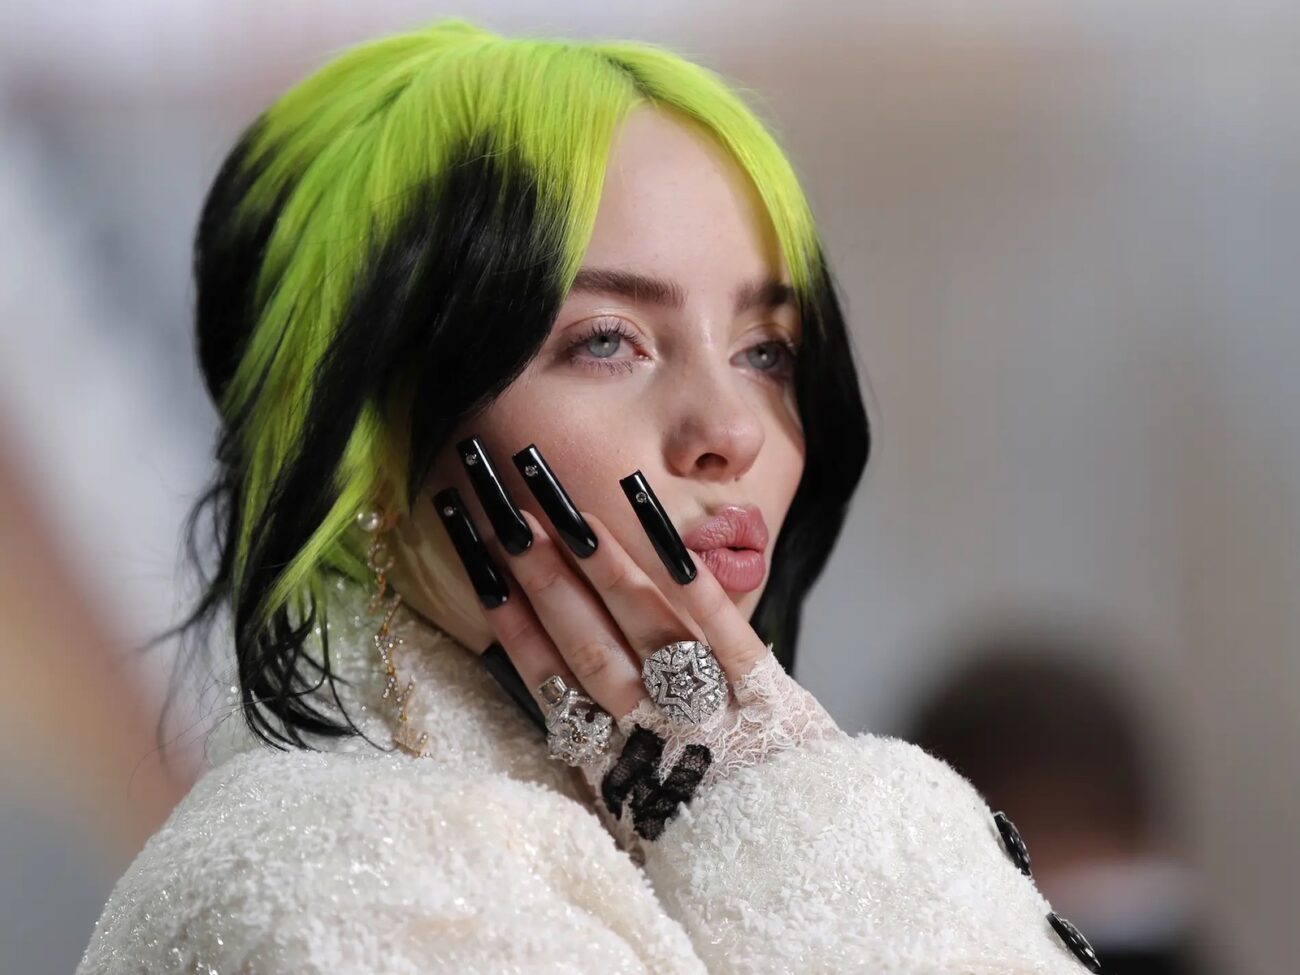 There is a rumor that turned out not to be so...Billie Eilish has had a tough bout of depression. Here's her own words.